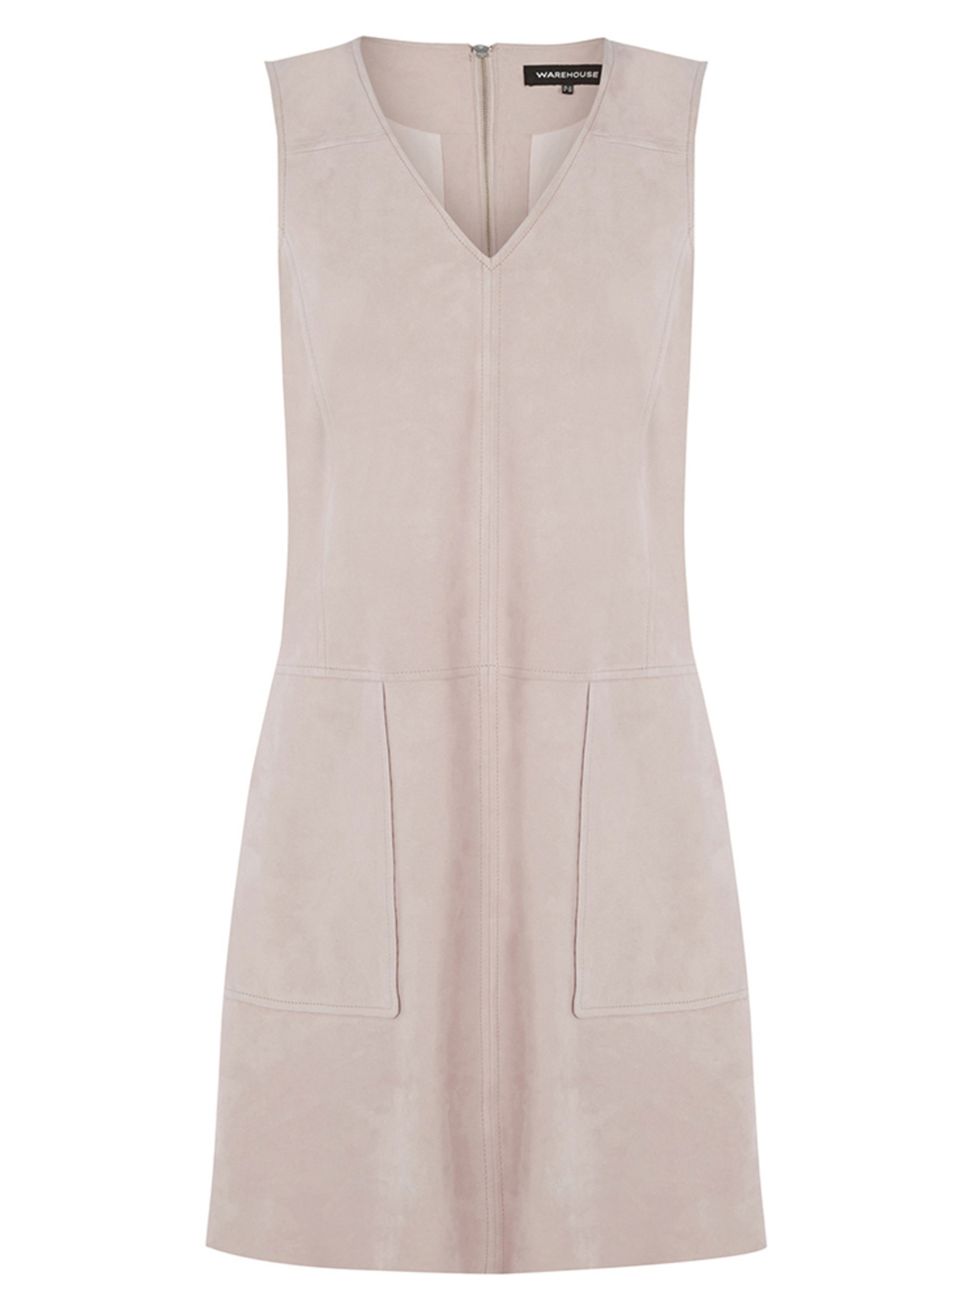 <p><a href="http://www.warehouse.co.uk/suede-a-line-shift-dress/dresses/warehouse/fcp-product/02302650" target="_blank">Warehouse</a> dress, £110</p>